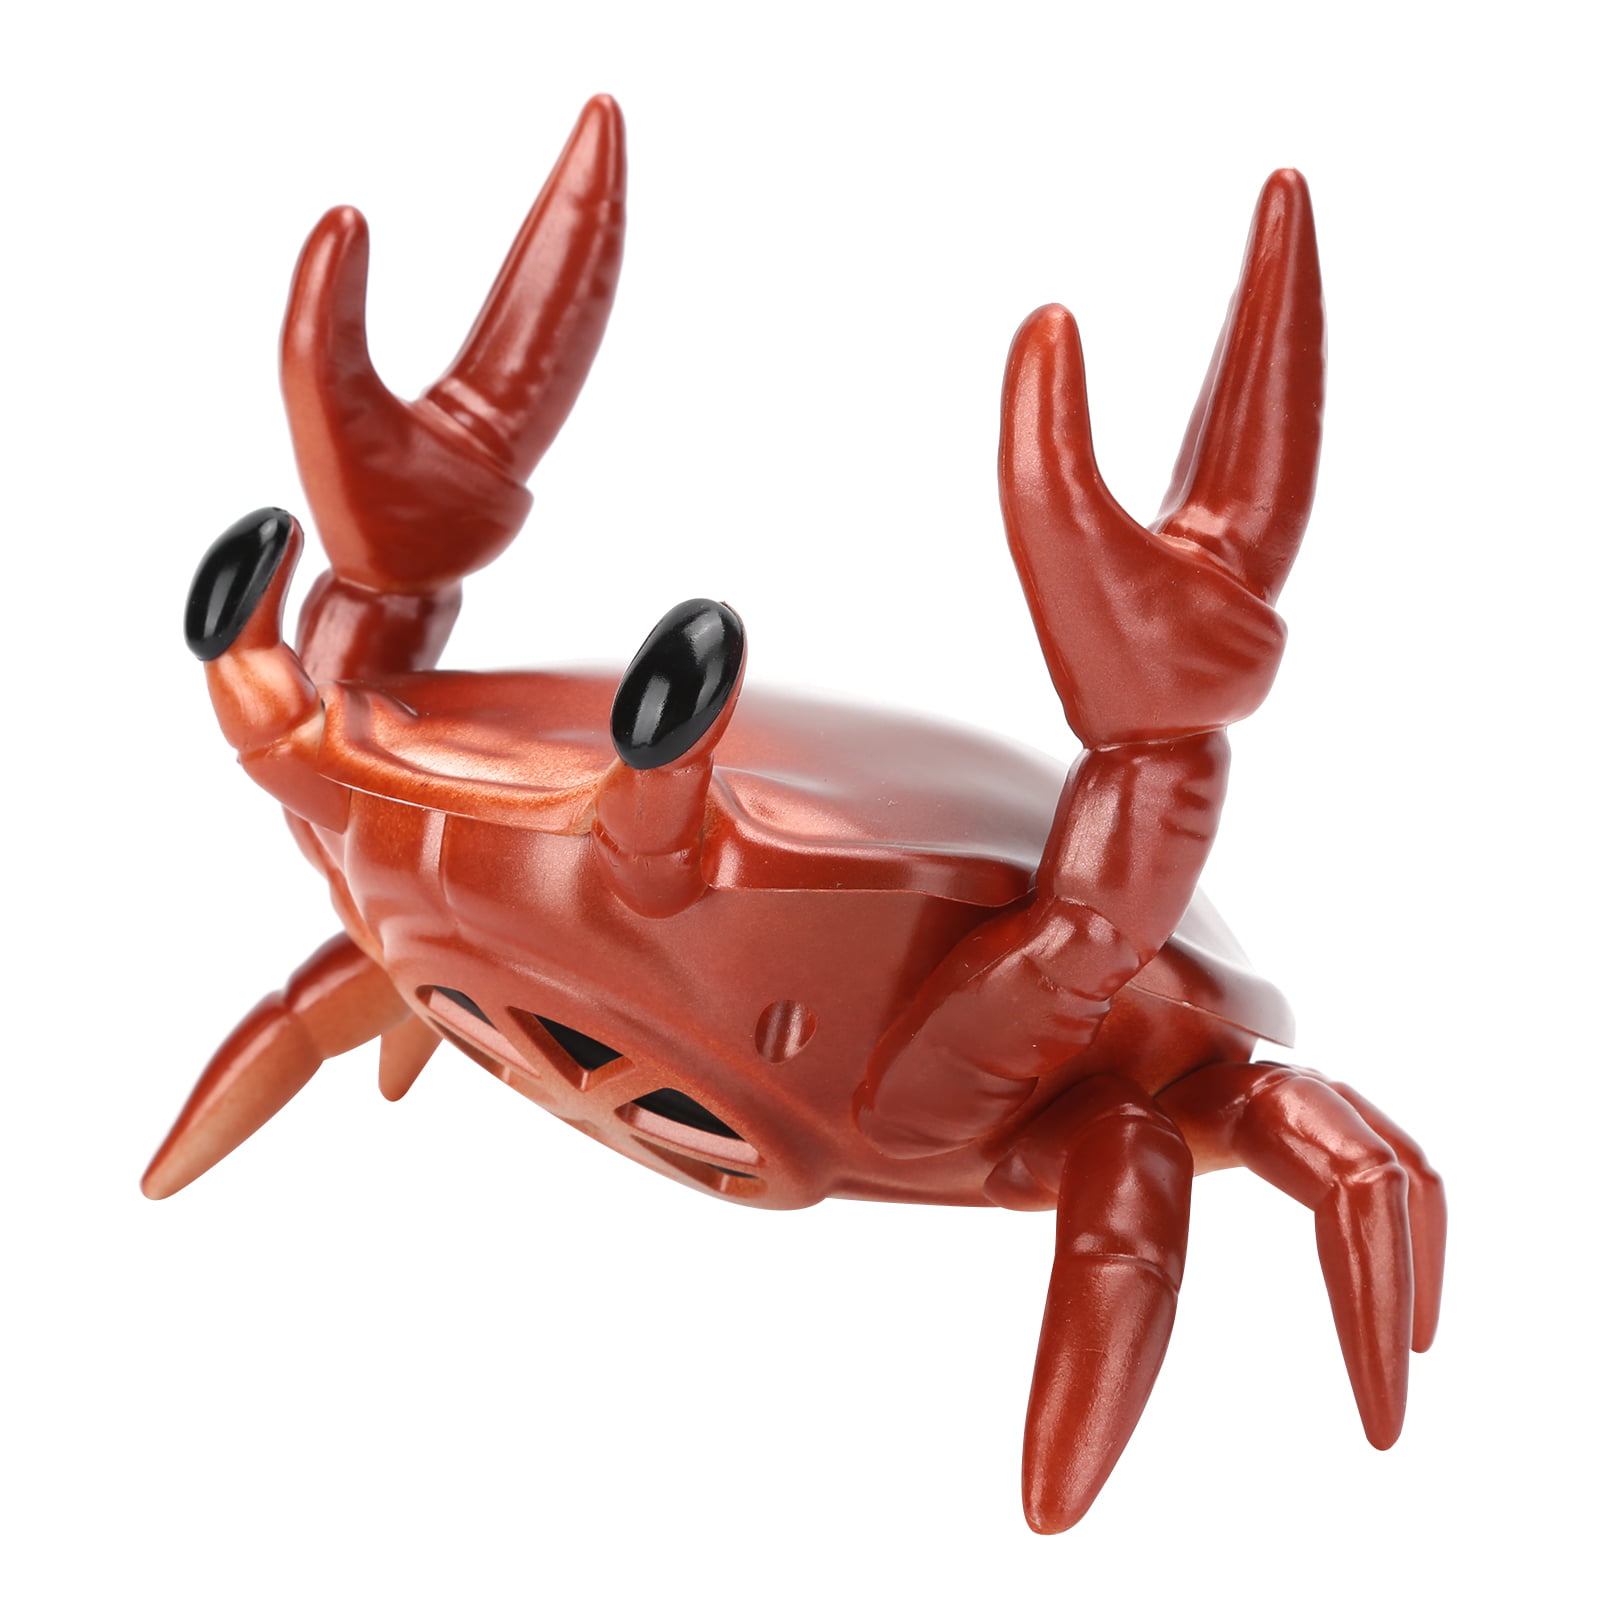 CRAB - SUPPORT UNIVERSEL POUR SMARTPHONE